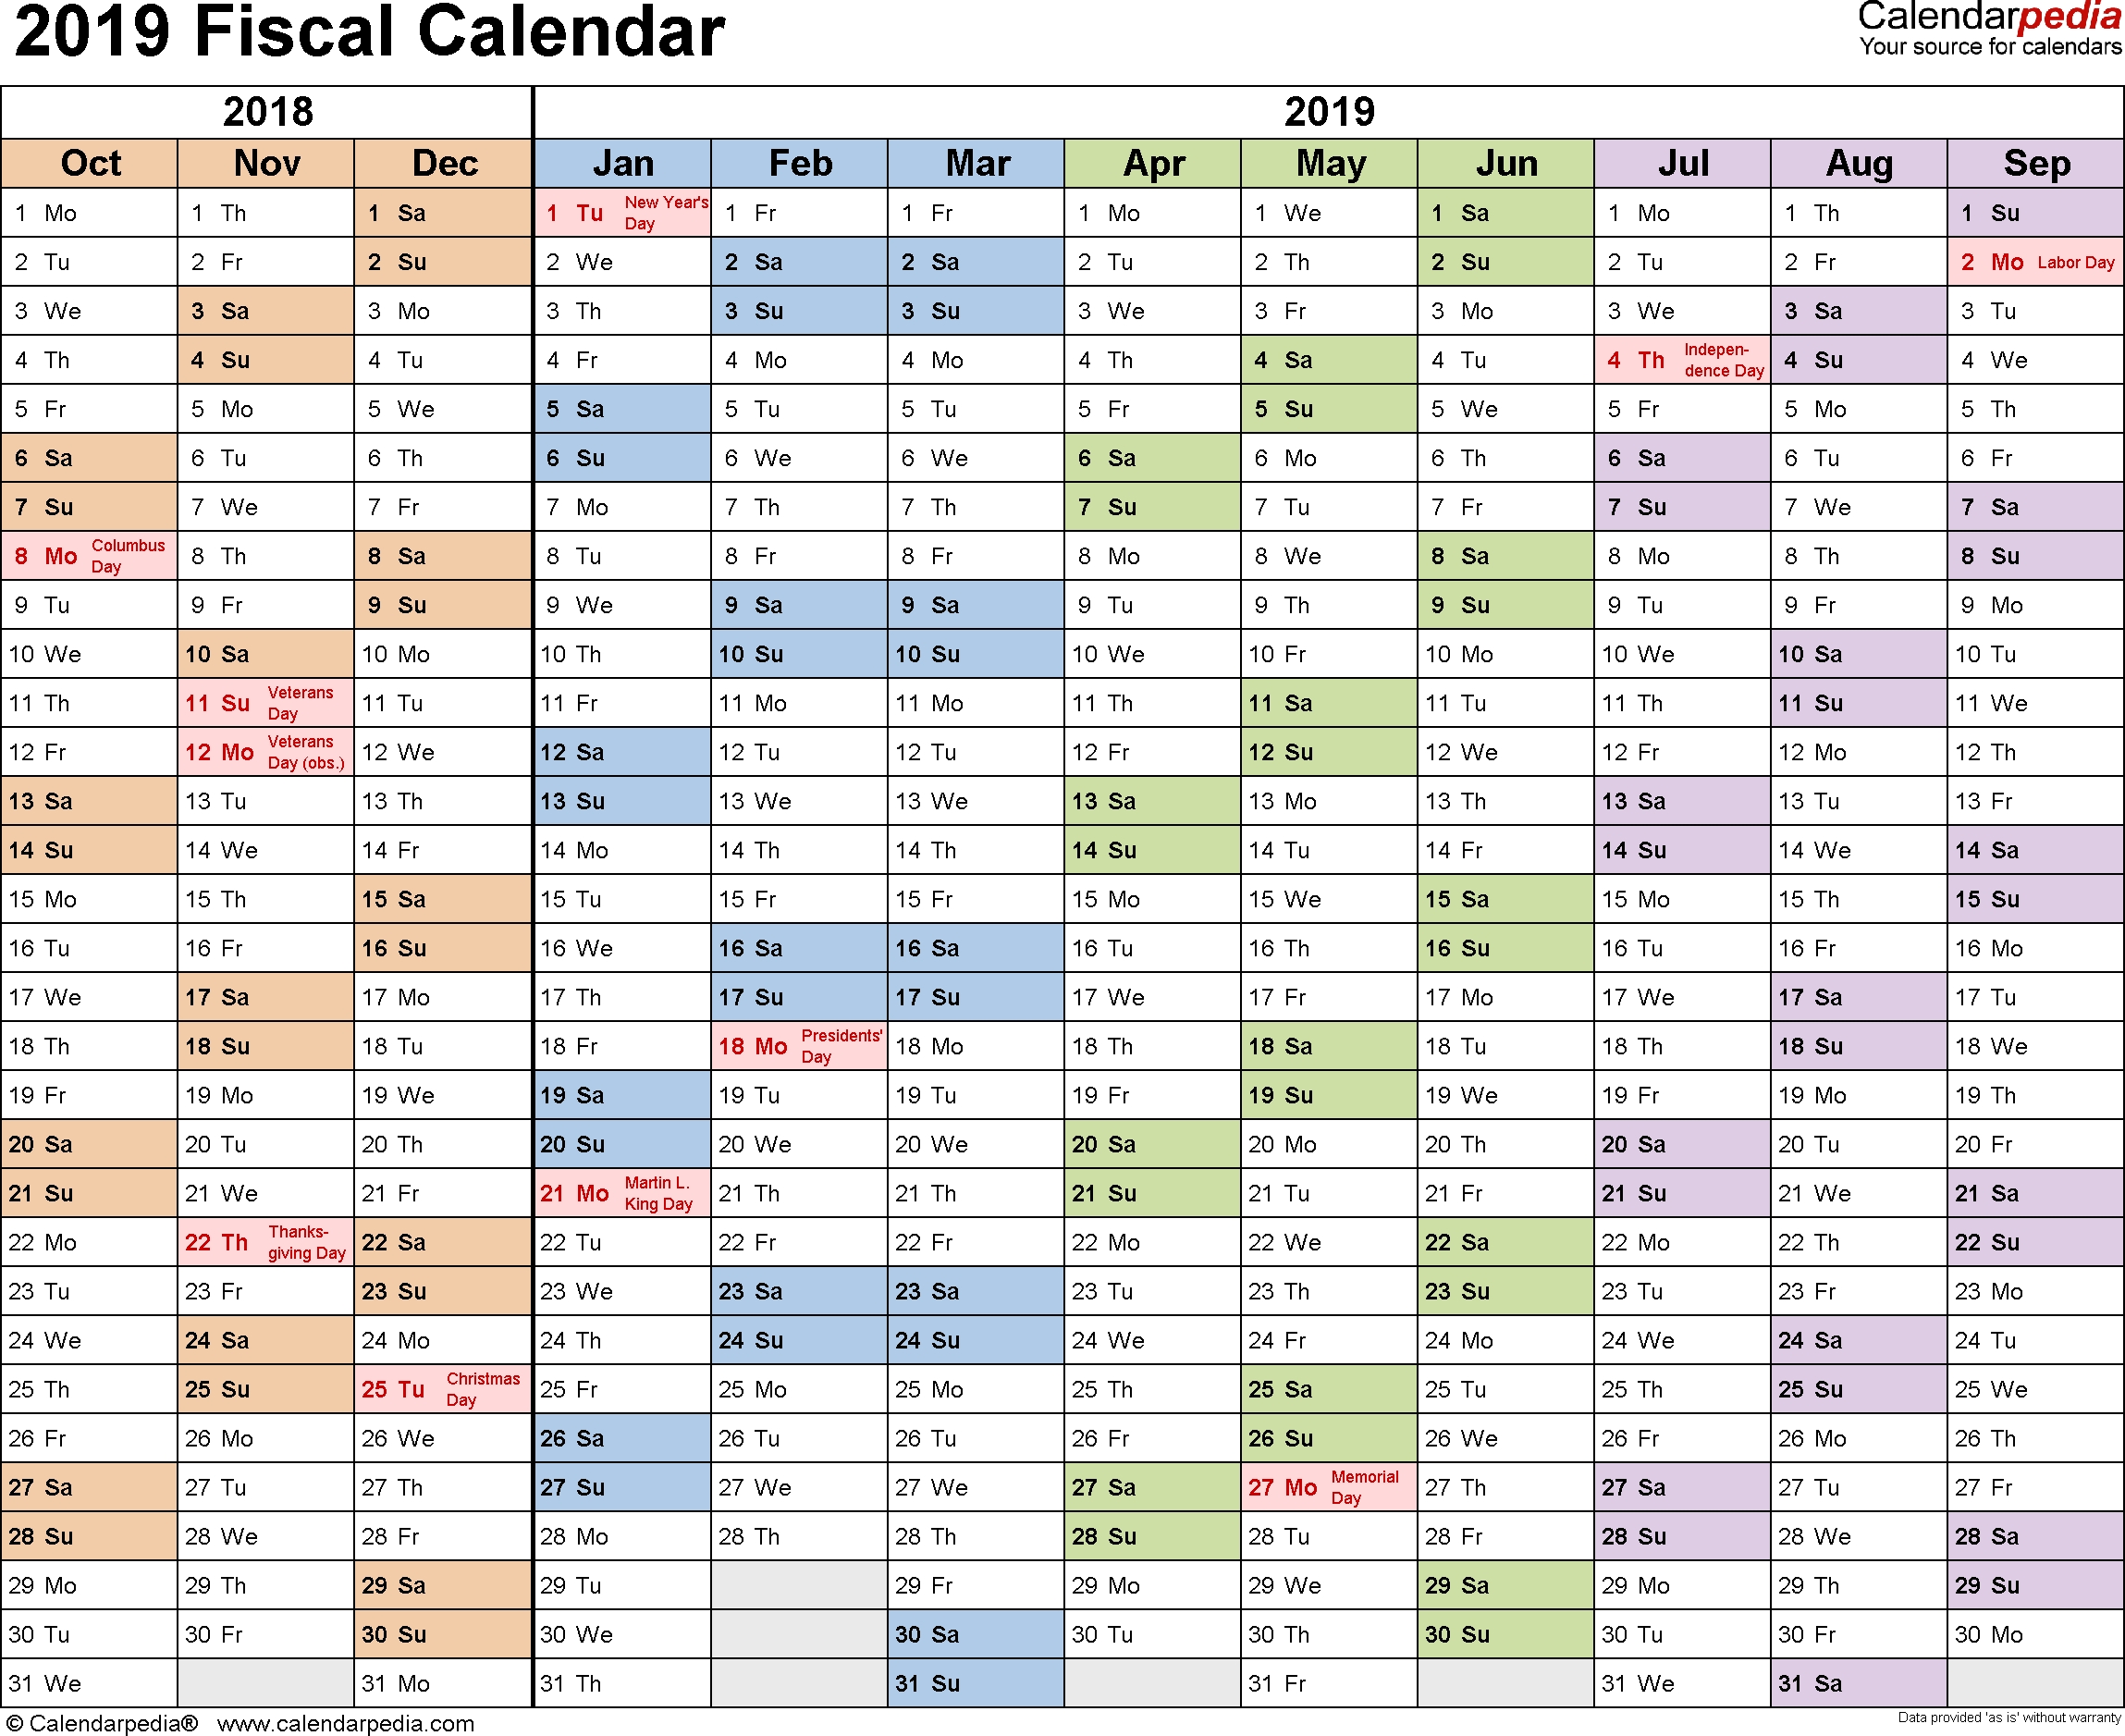 Fiscal Year 2019 Calendar With Us Holidays